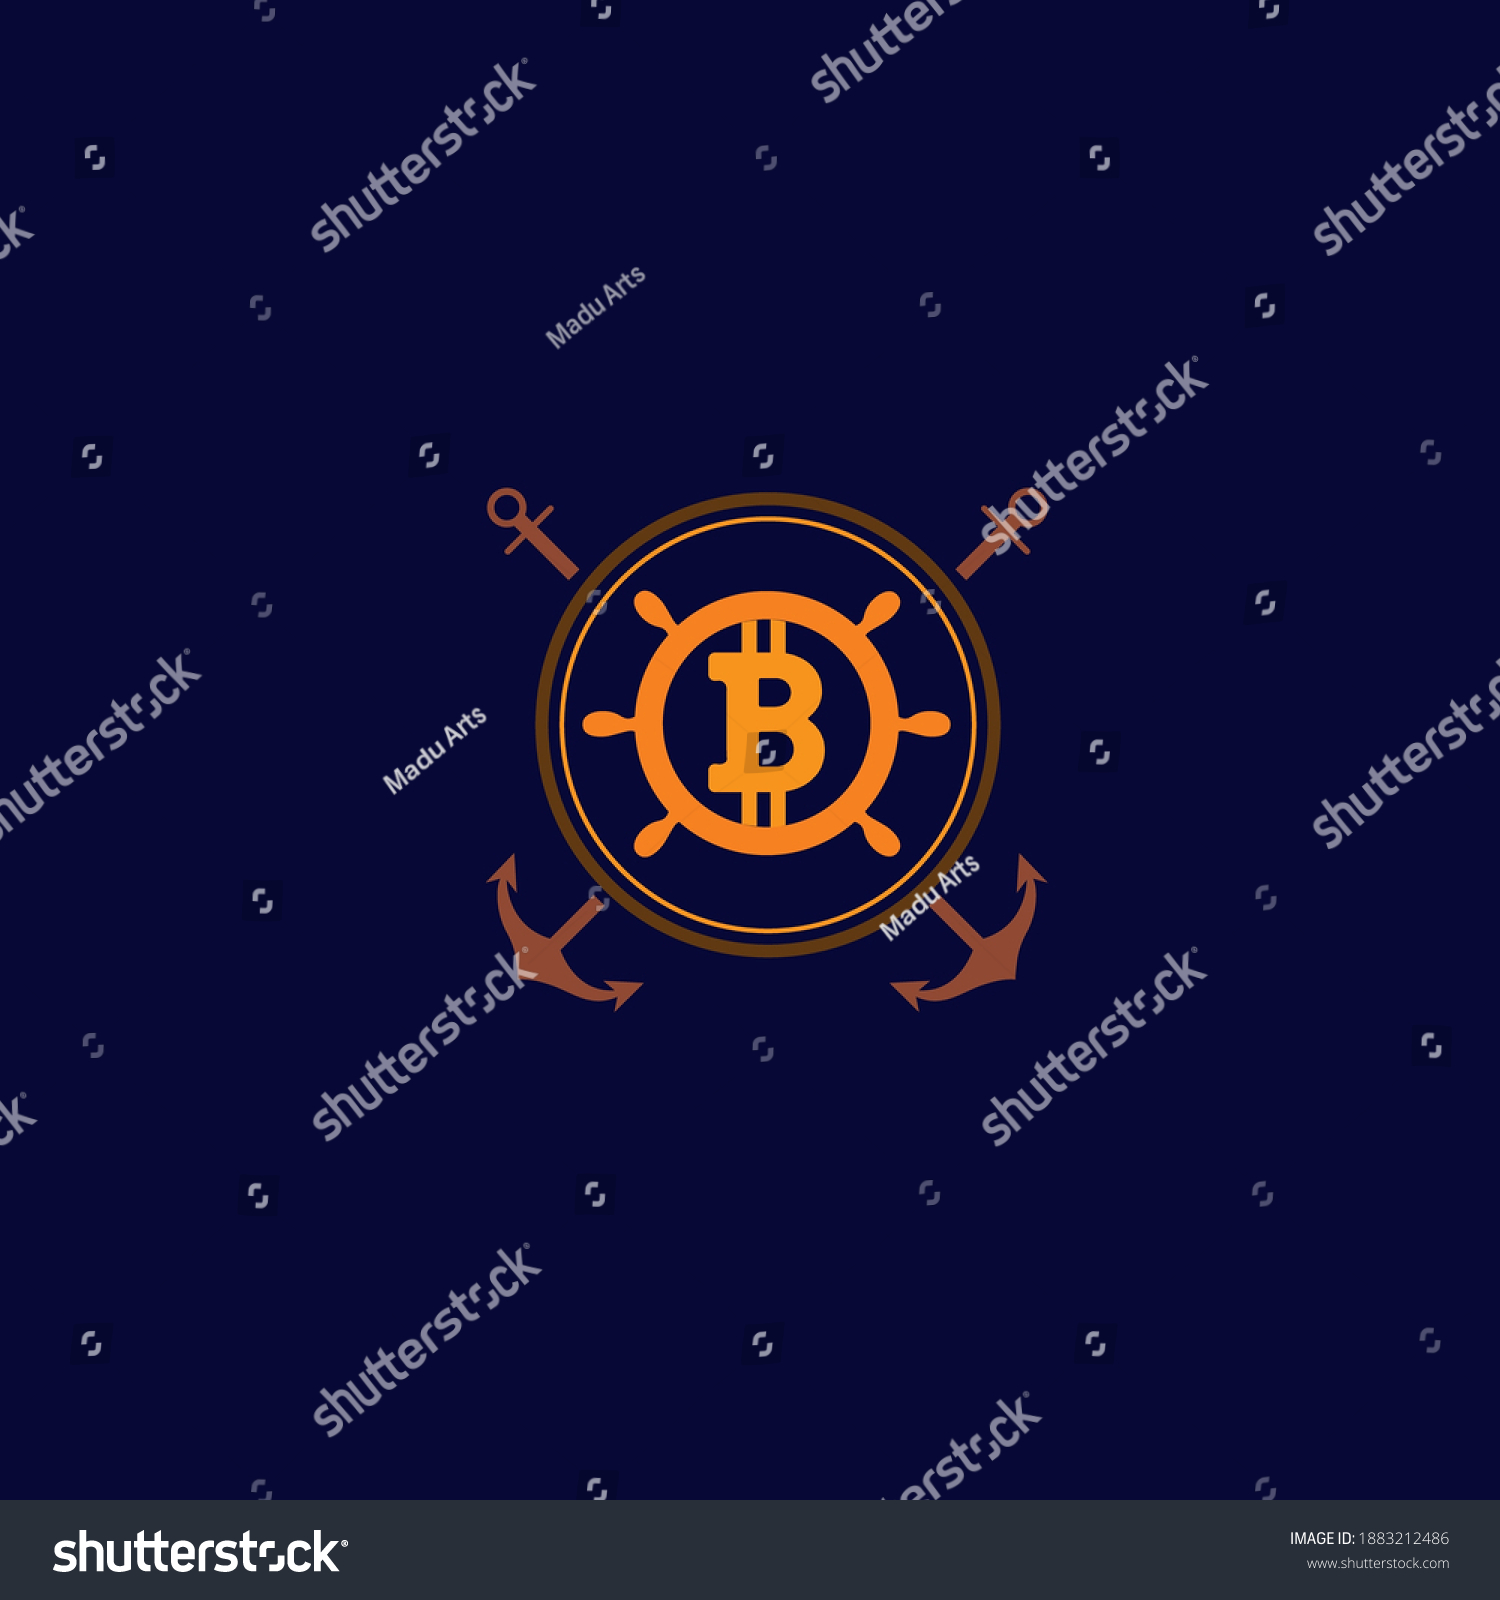 SVG of Logo for earning bitcoin. It can be used youtube channel, facebook page, telegram channel, whatsapp or any other groups. svg